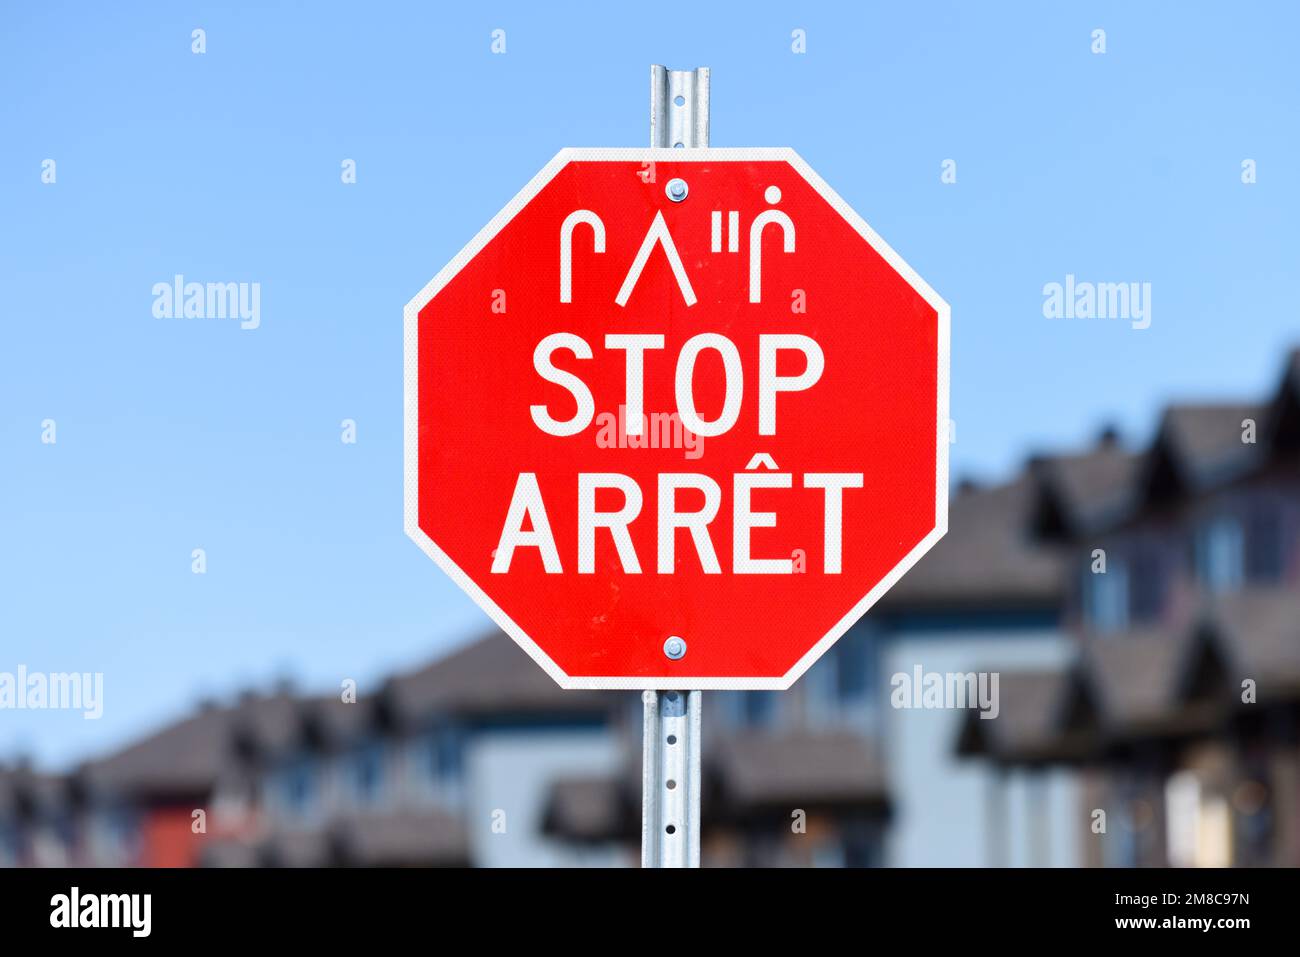 Stop sign in three languages: Cree (indigenous language) French and English in Northern Quebec Canada Stock Photo